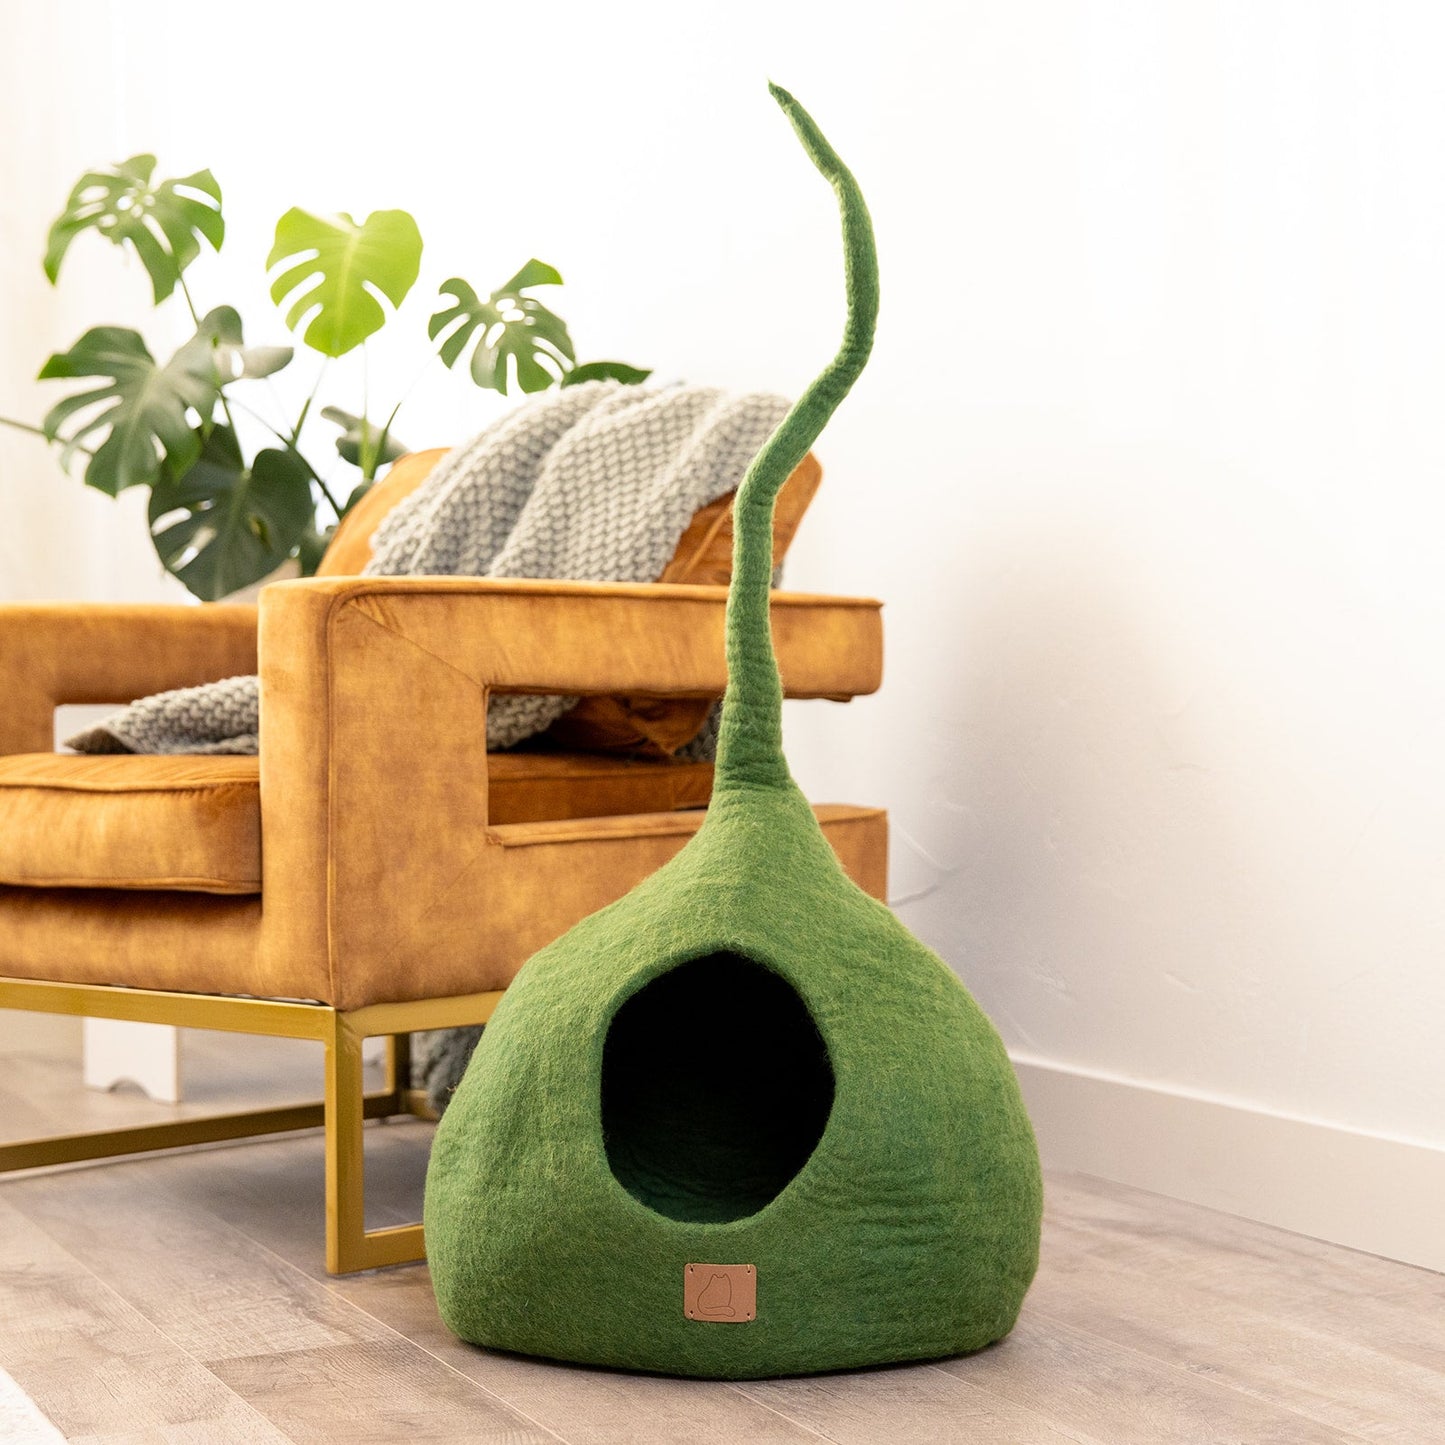 Deluxe Handcrafted Felt Cat Cave With Tail - Forest Green